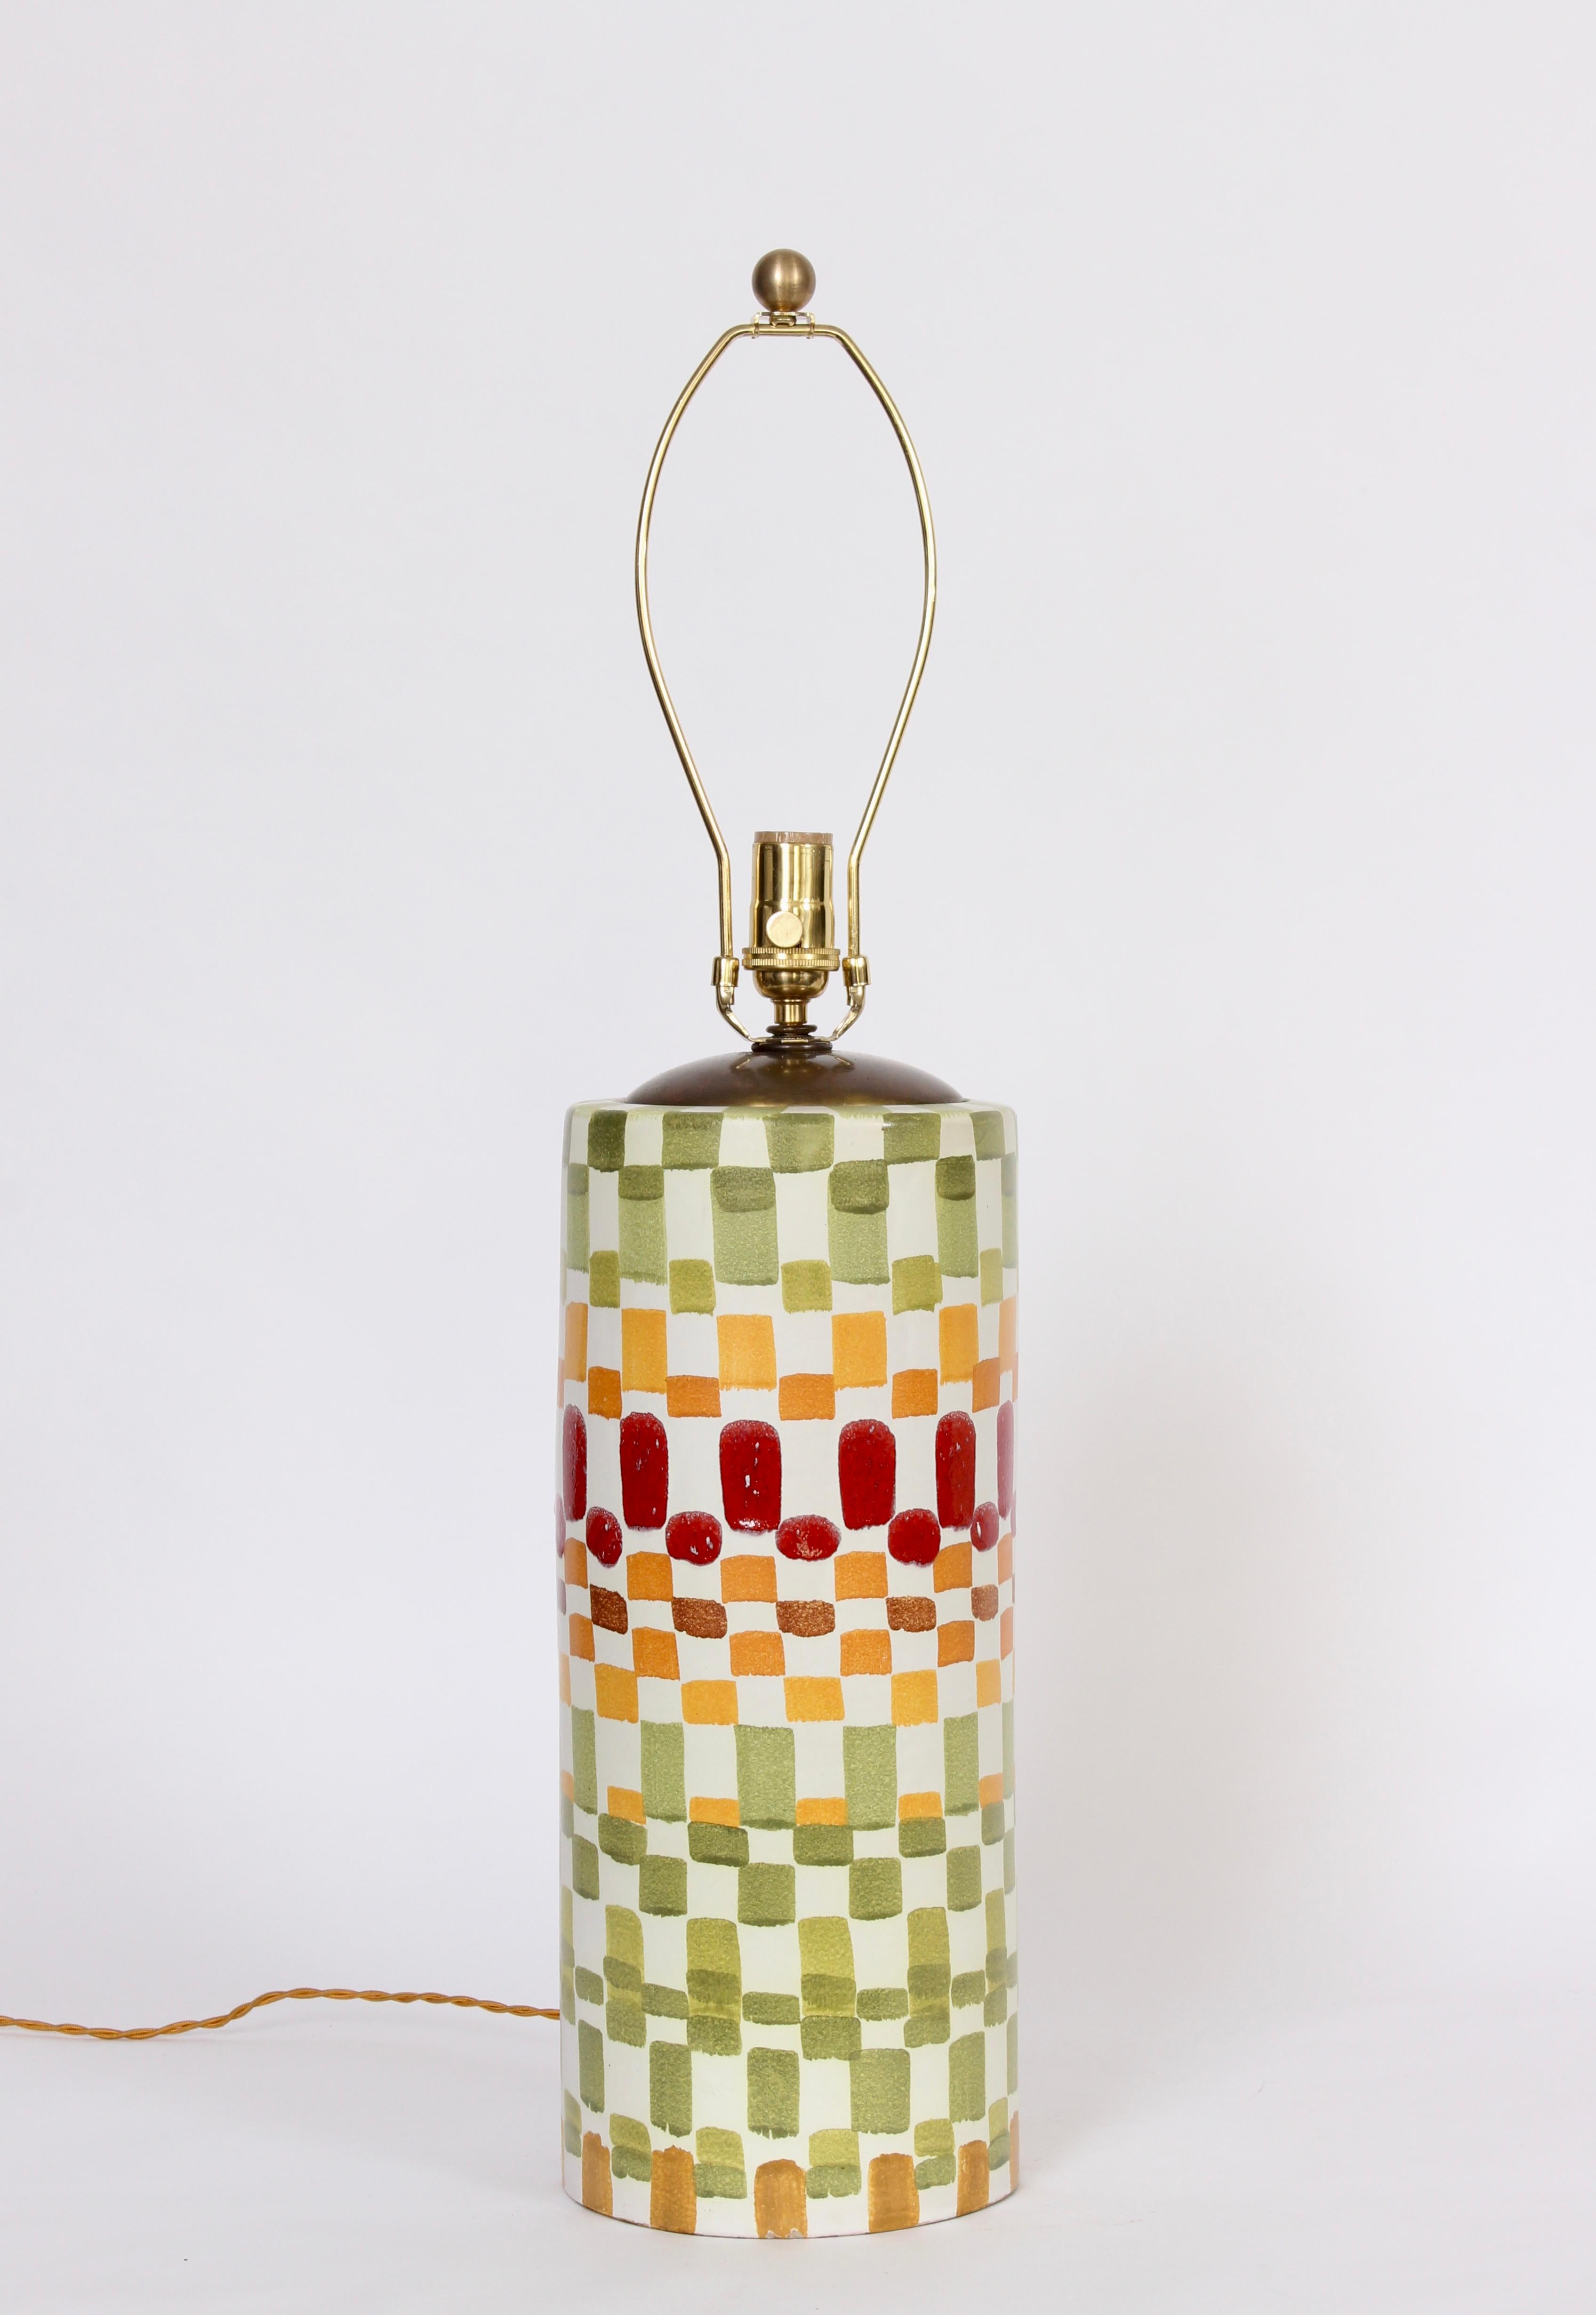 Aldo Londi for Bitossi hand painted multi colored checkerboard glazed ceramic table lamp, 1960's. Featuring a reflective glazed white column, with a patchwork like, repetitive square pattern in greens, gold red and orange. Shade shown for display